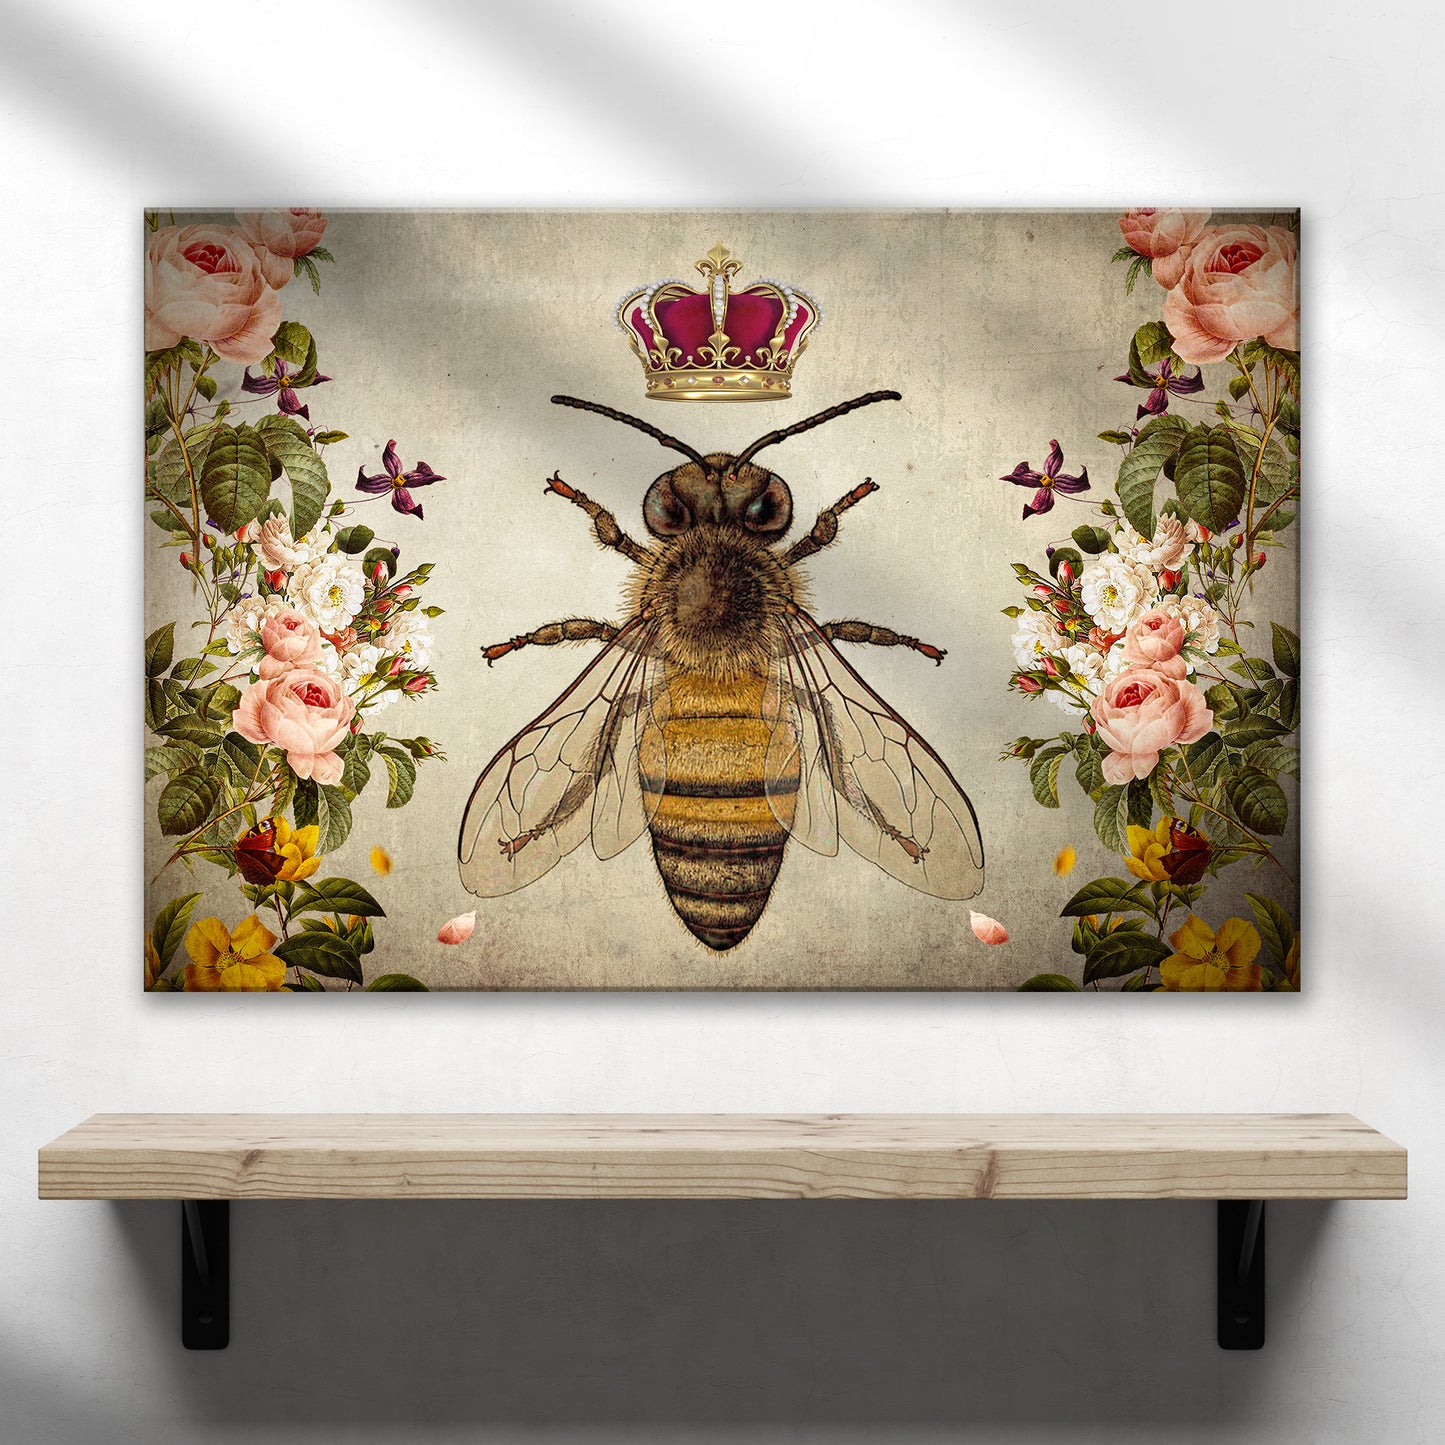 Hail Queen Bee Canvas Wall Art - Image by Tailored Canvases